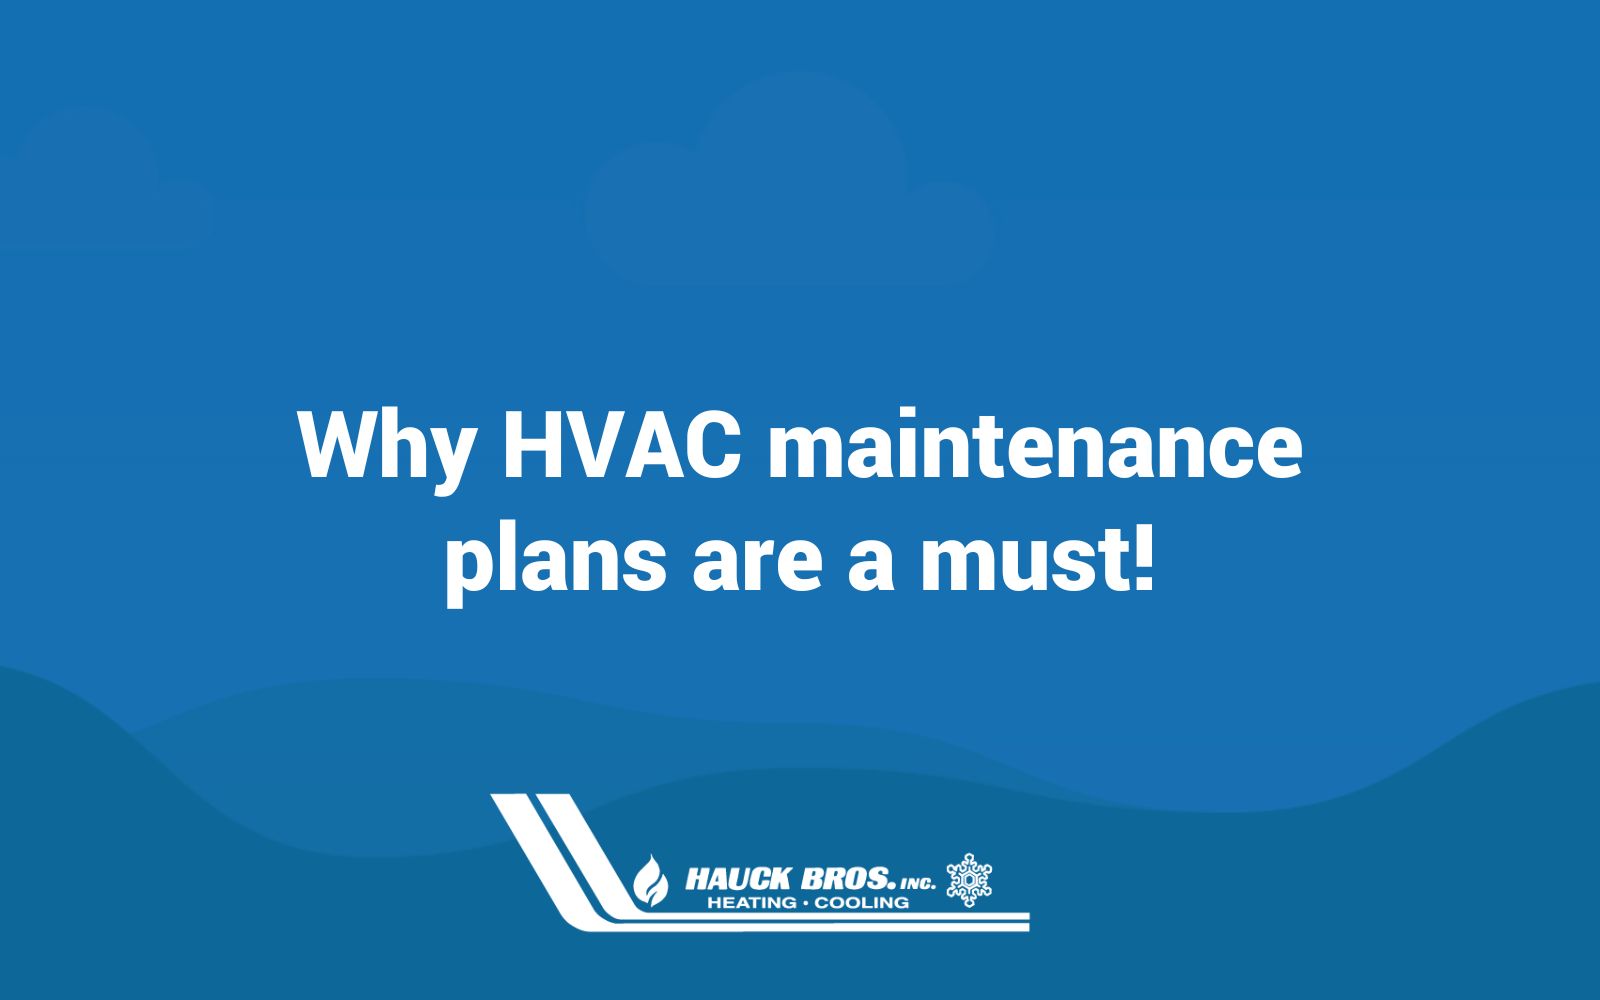 Why HVAC maintenance plans are a must